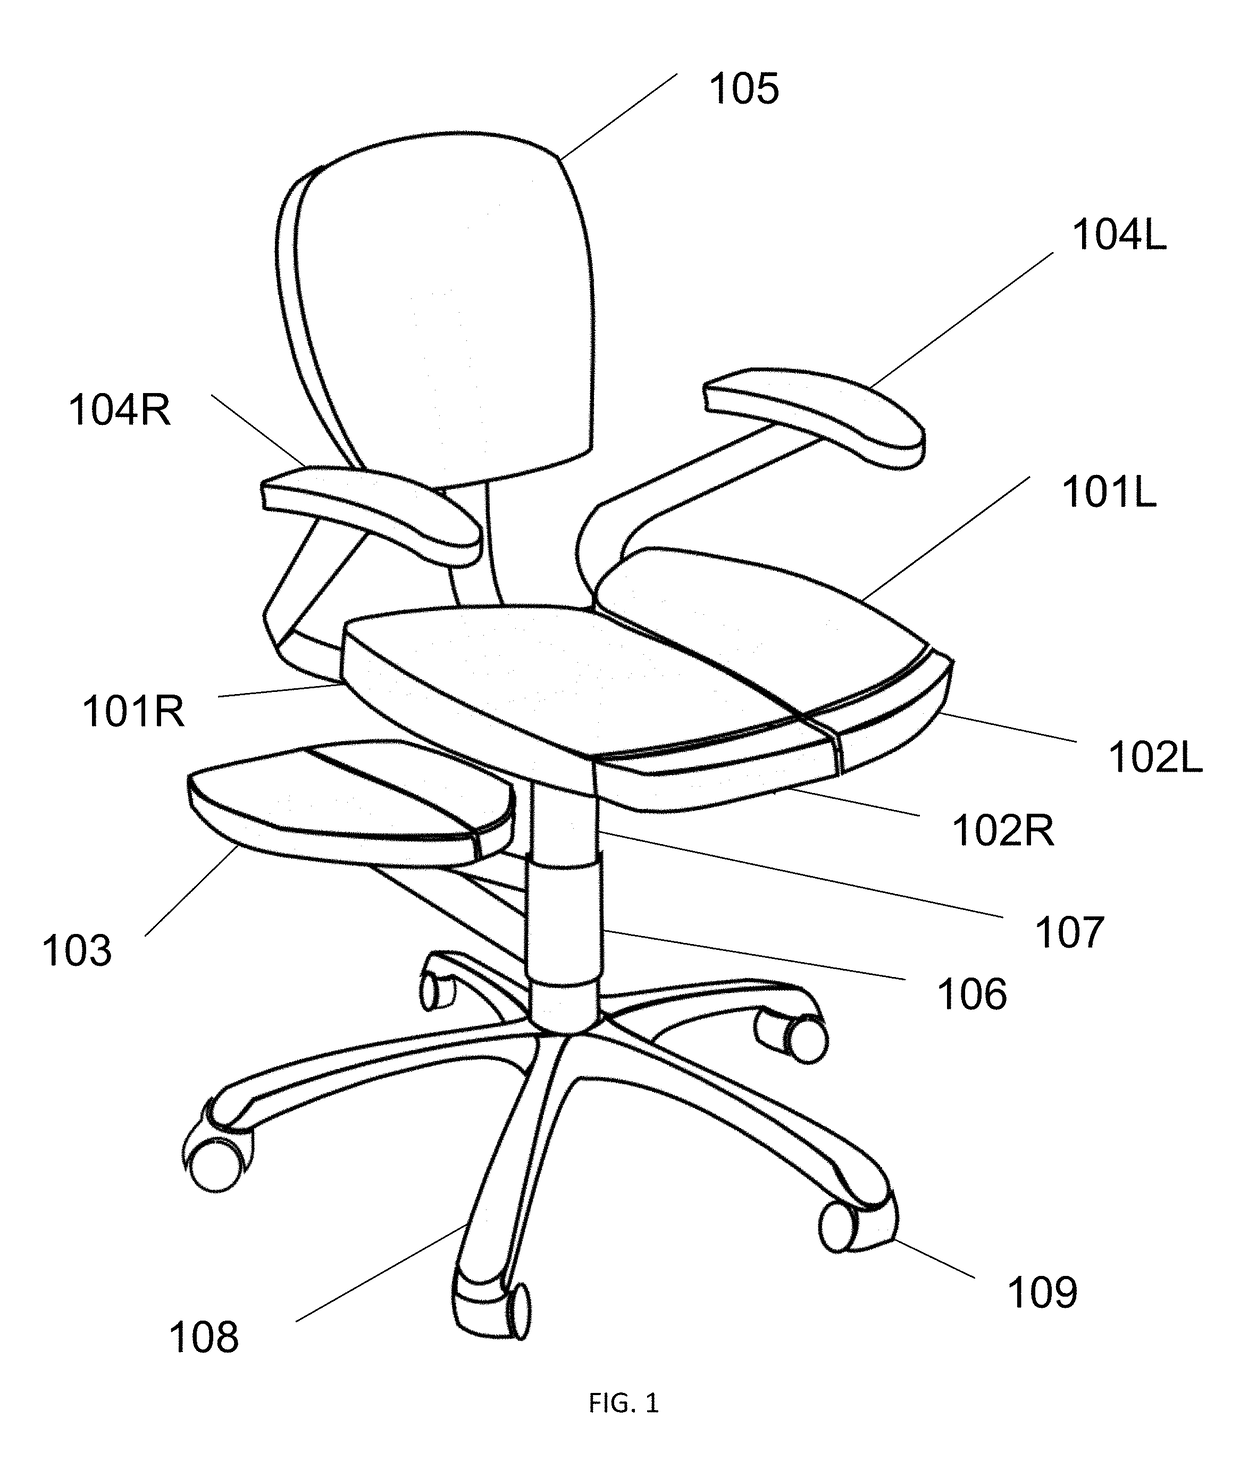 Chair that adapts to multiple sitting positions